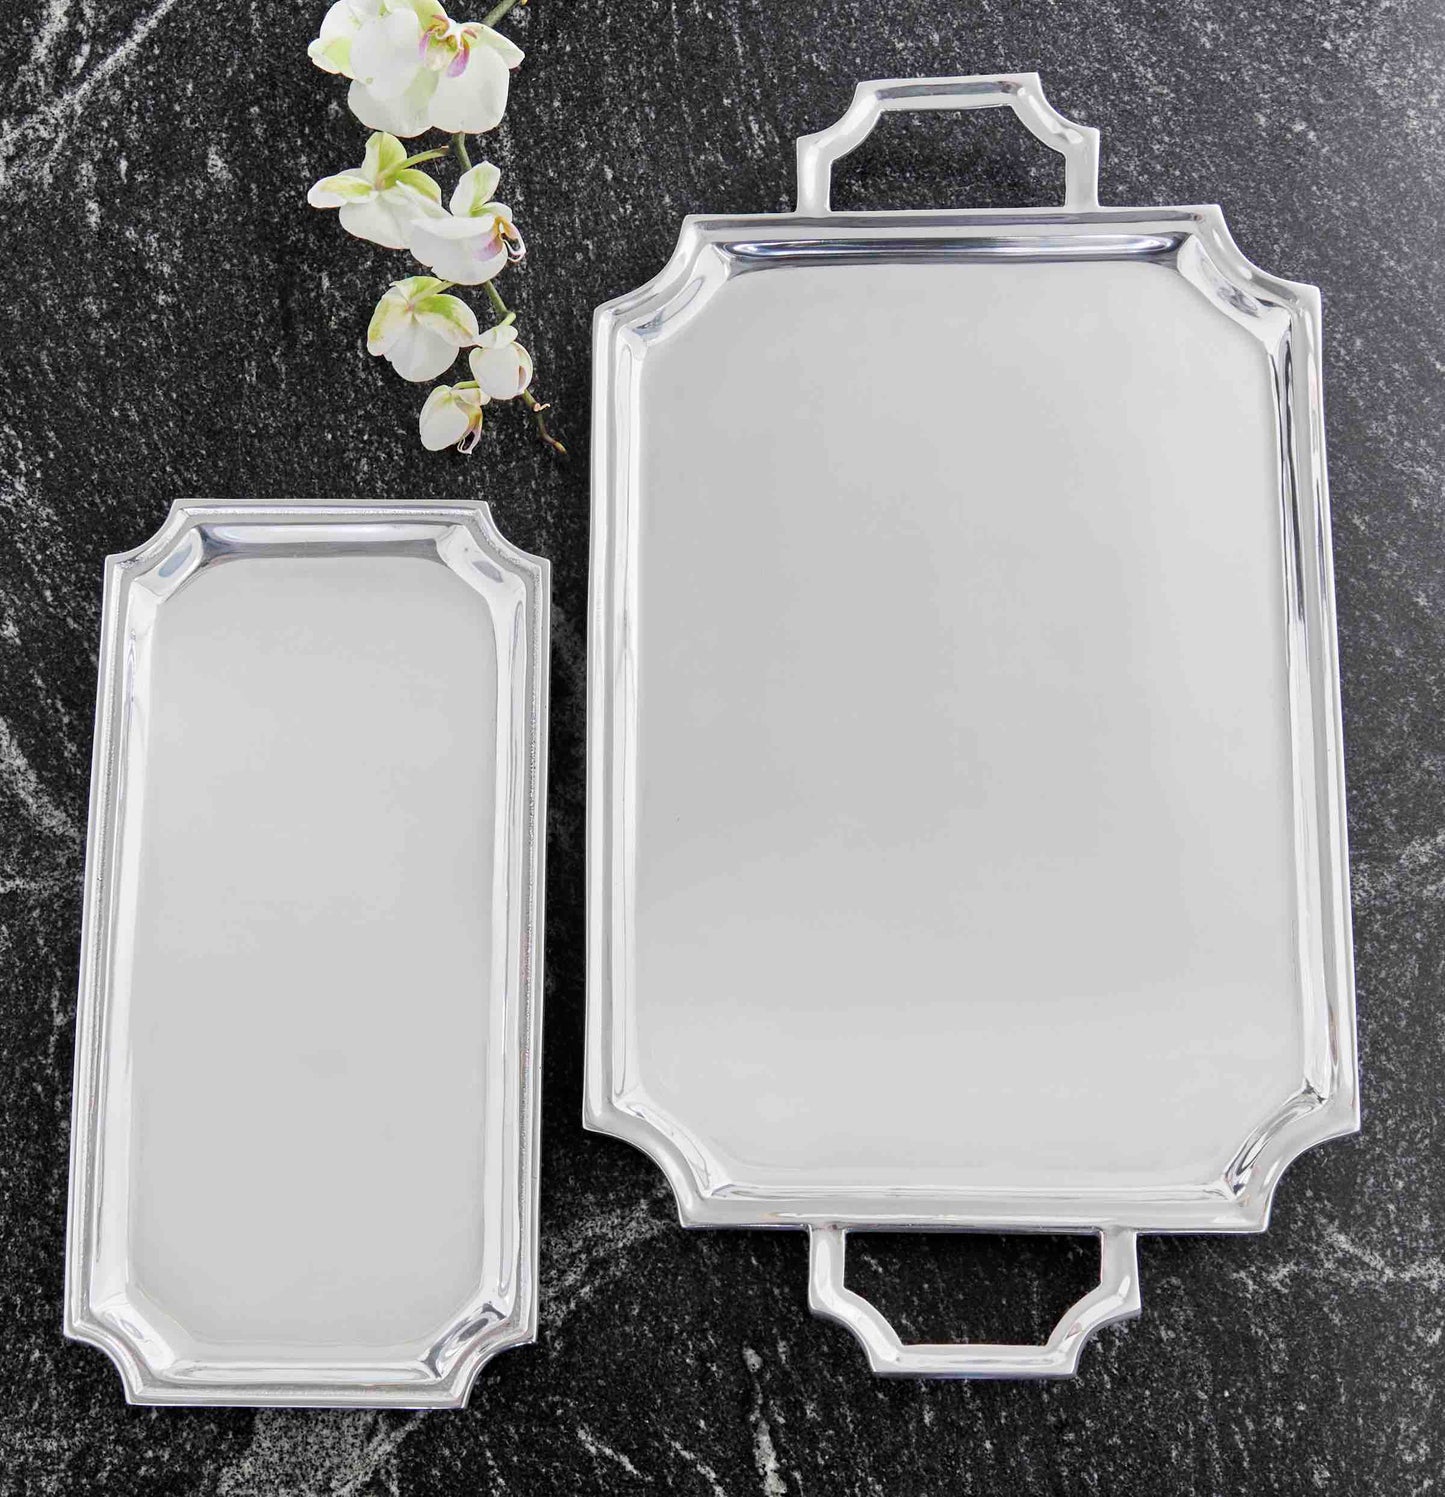 Silver Tray With No Handles